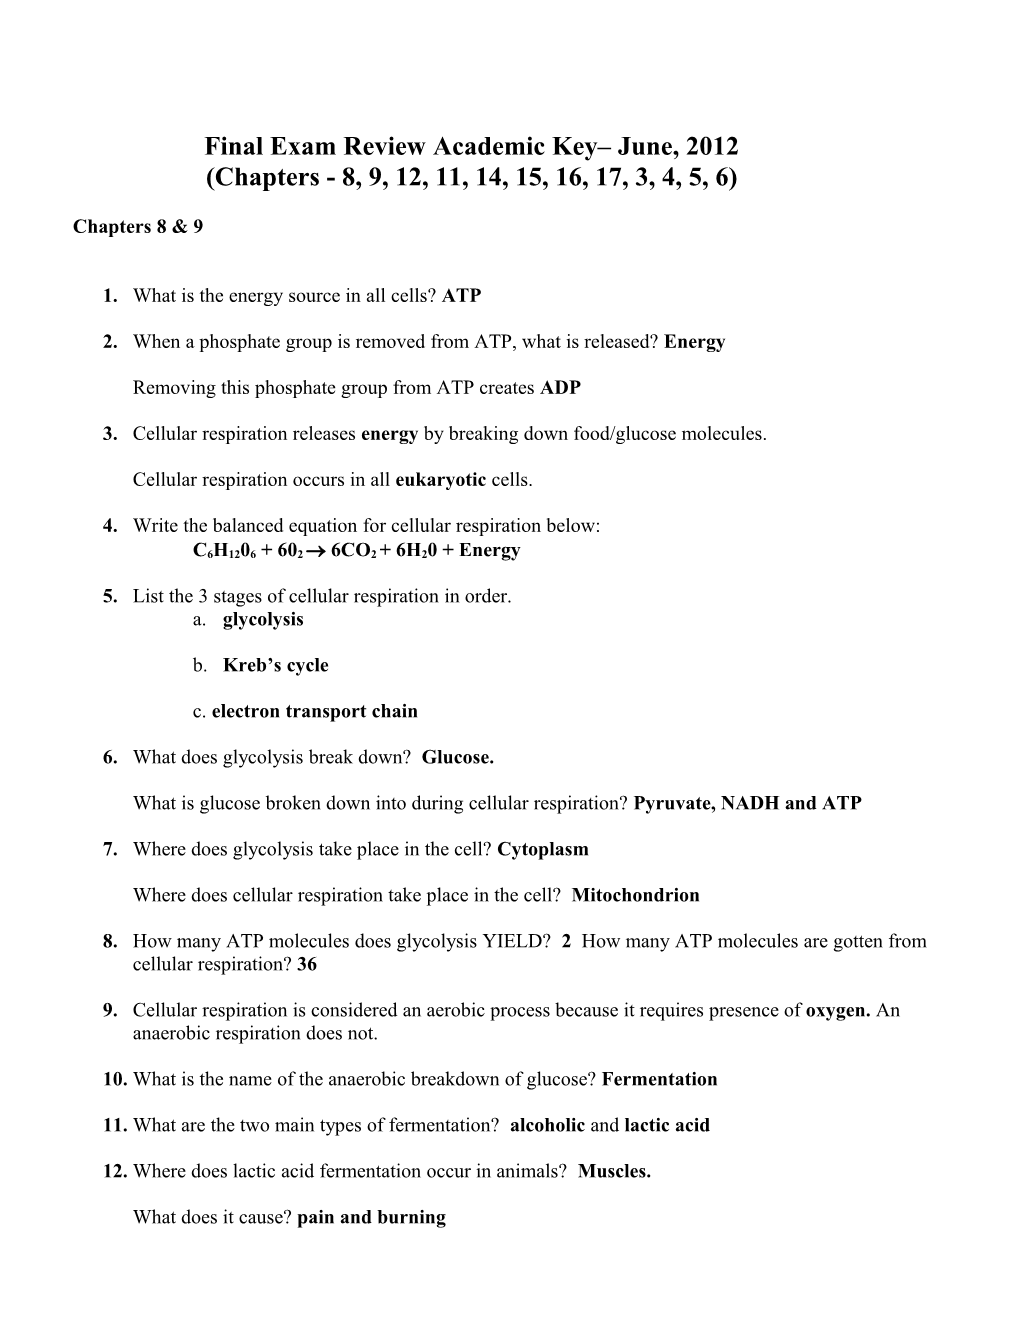 Final Exam Review - June, 2003 (Chapters 7 - 12)